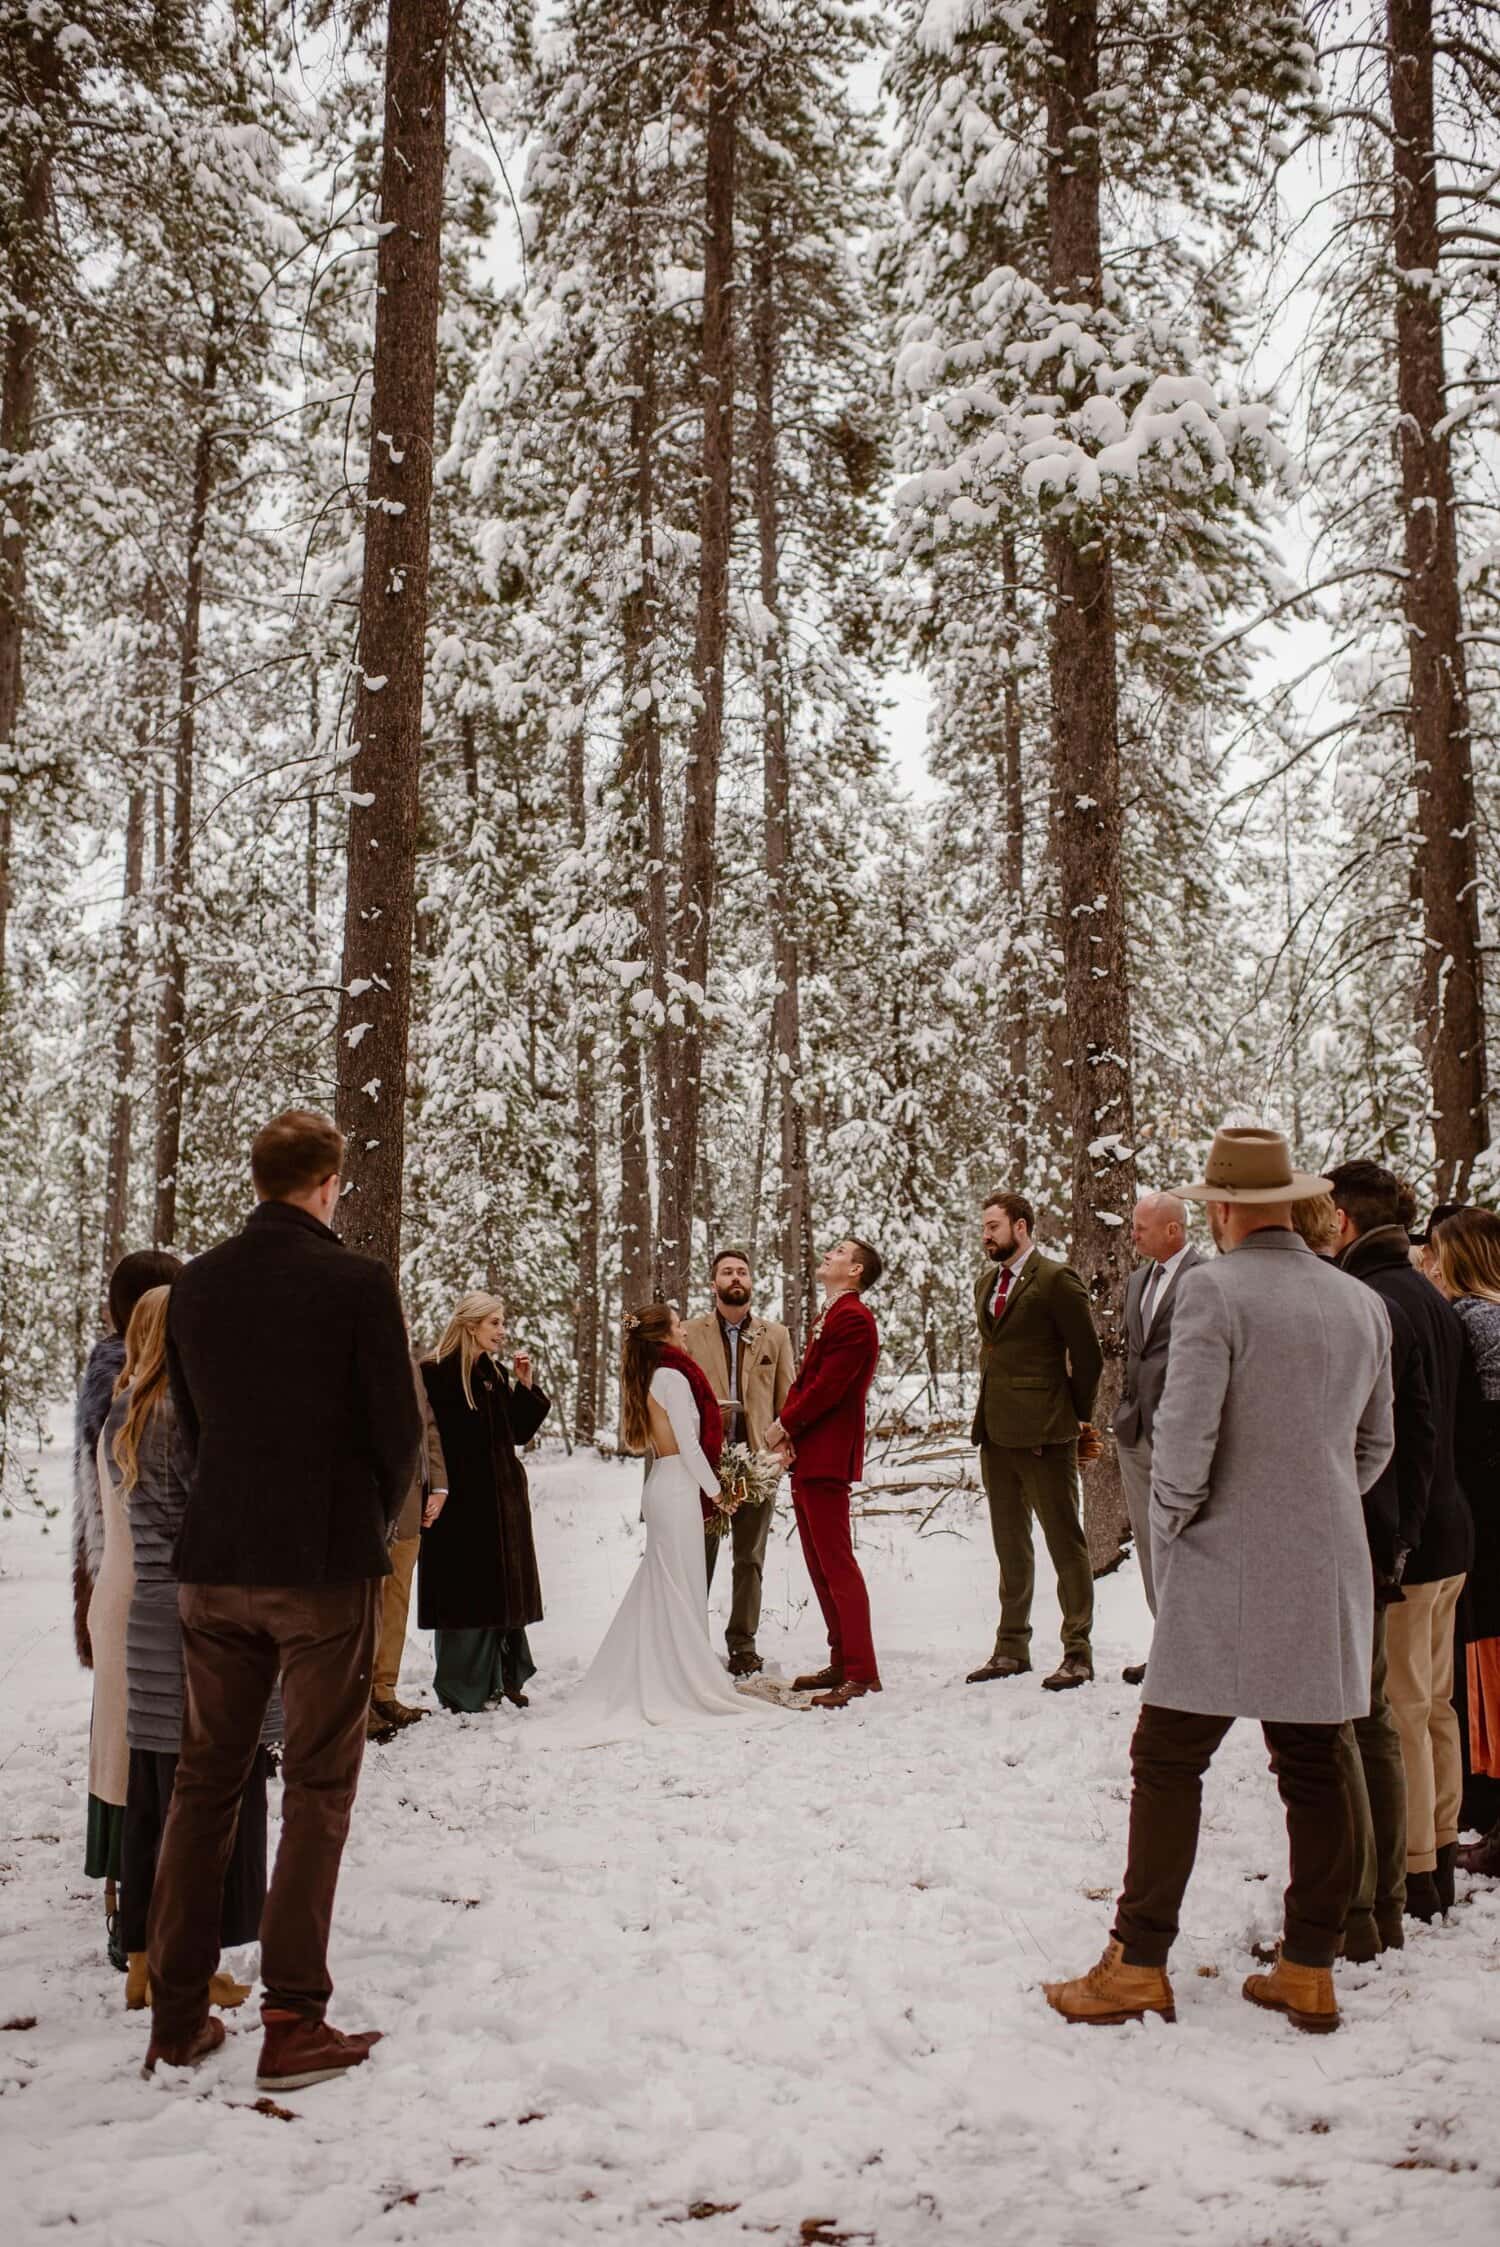 Bride and groom have an intimate wedding ceremony in the middle of a snow covered forest.